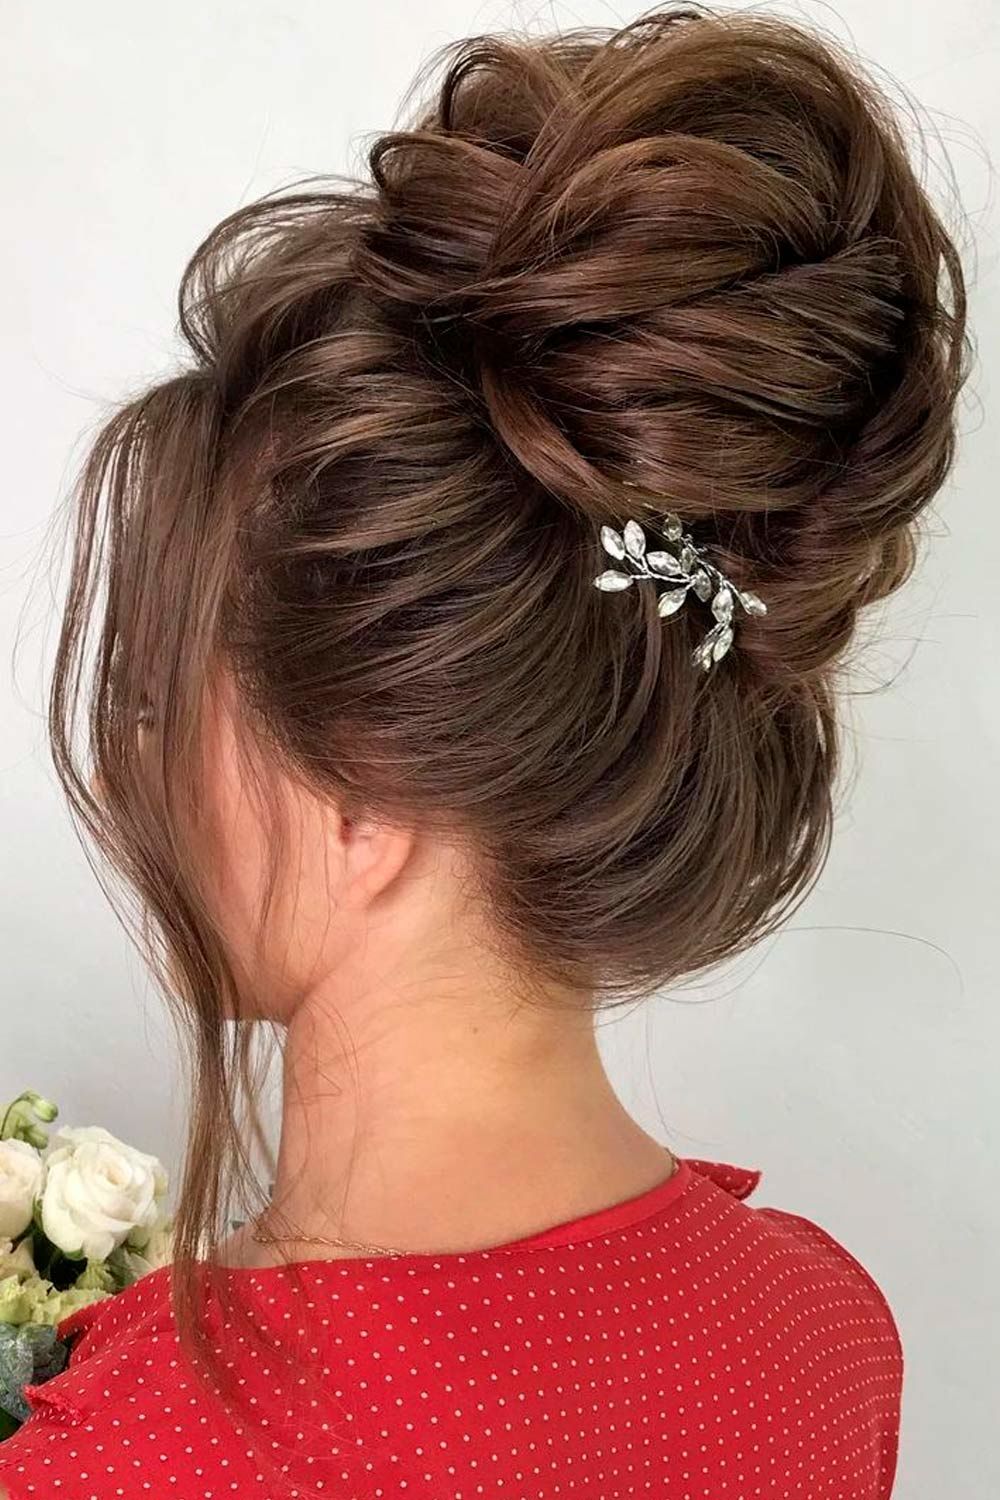 Top Knot Hairstyle 